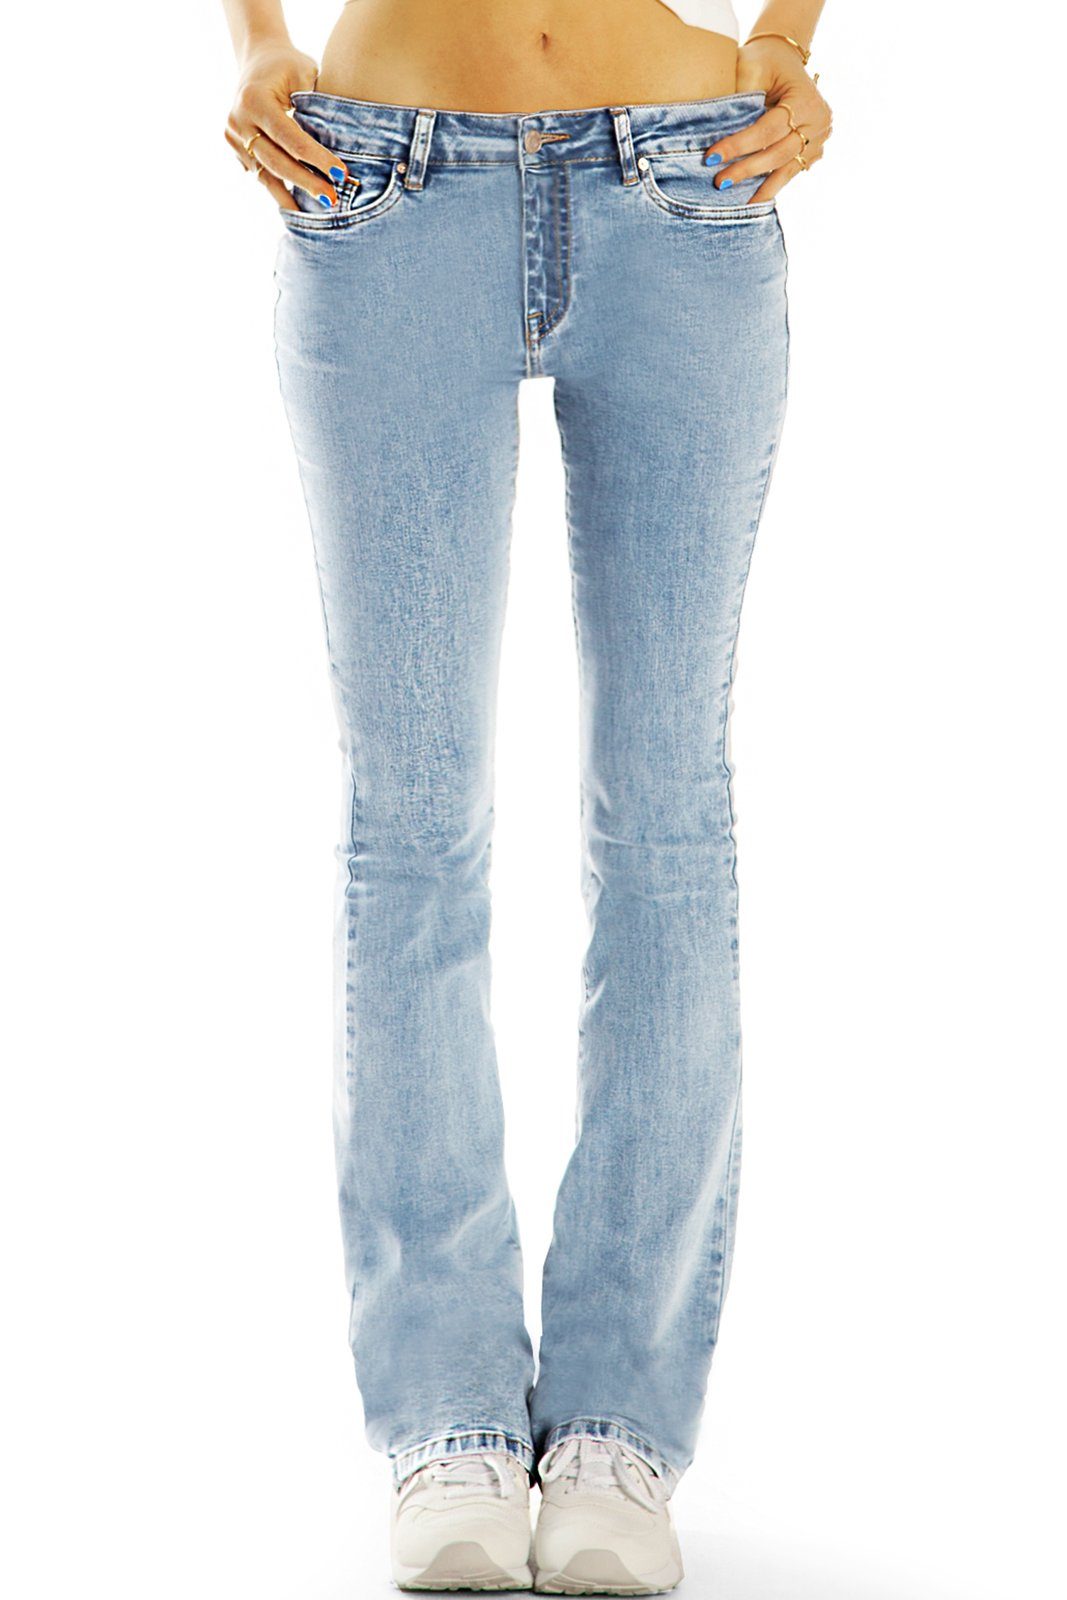 be styled Bootcut-Jeans Hose, - Stretch mid Bootcut Schlagjeans, waist Jeans j2m